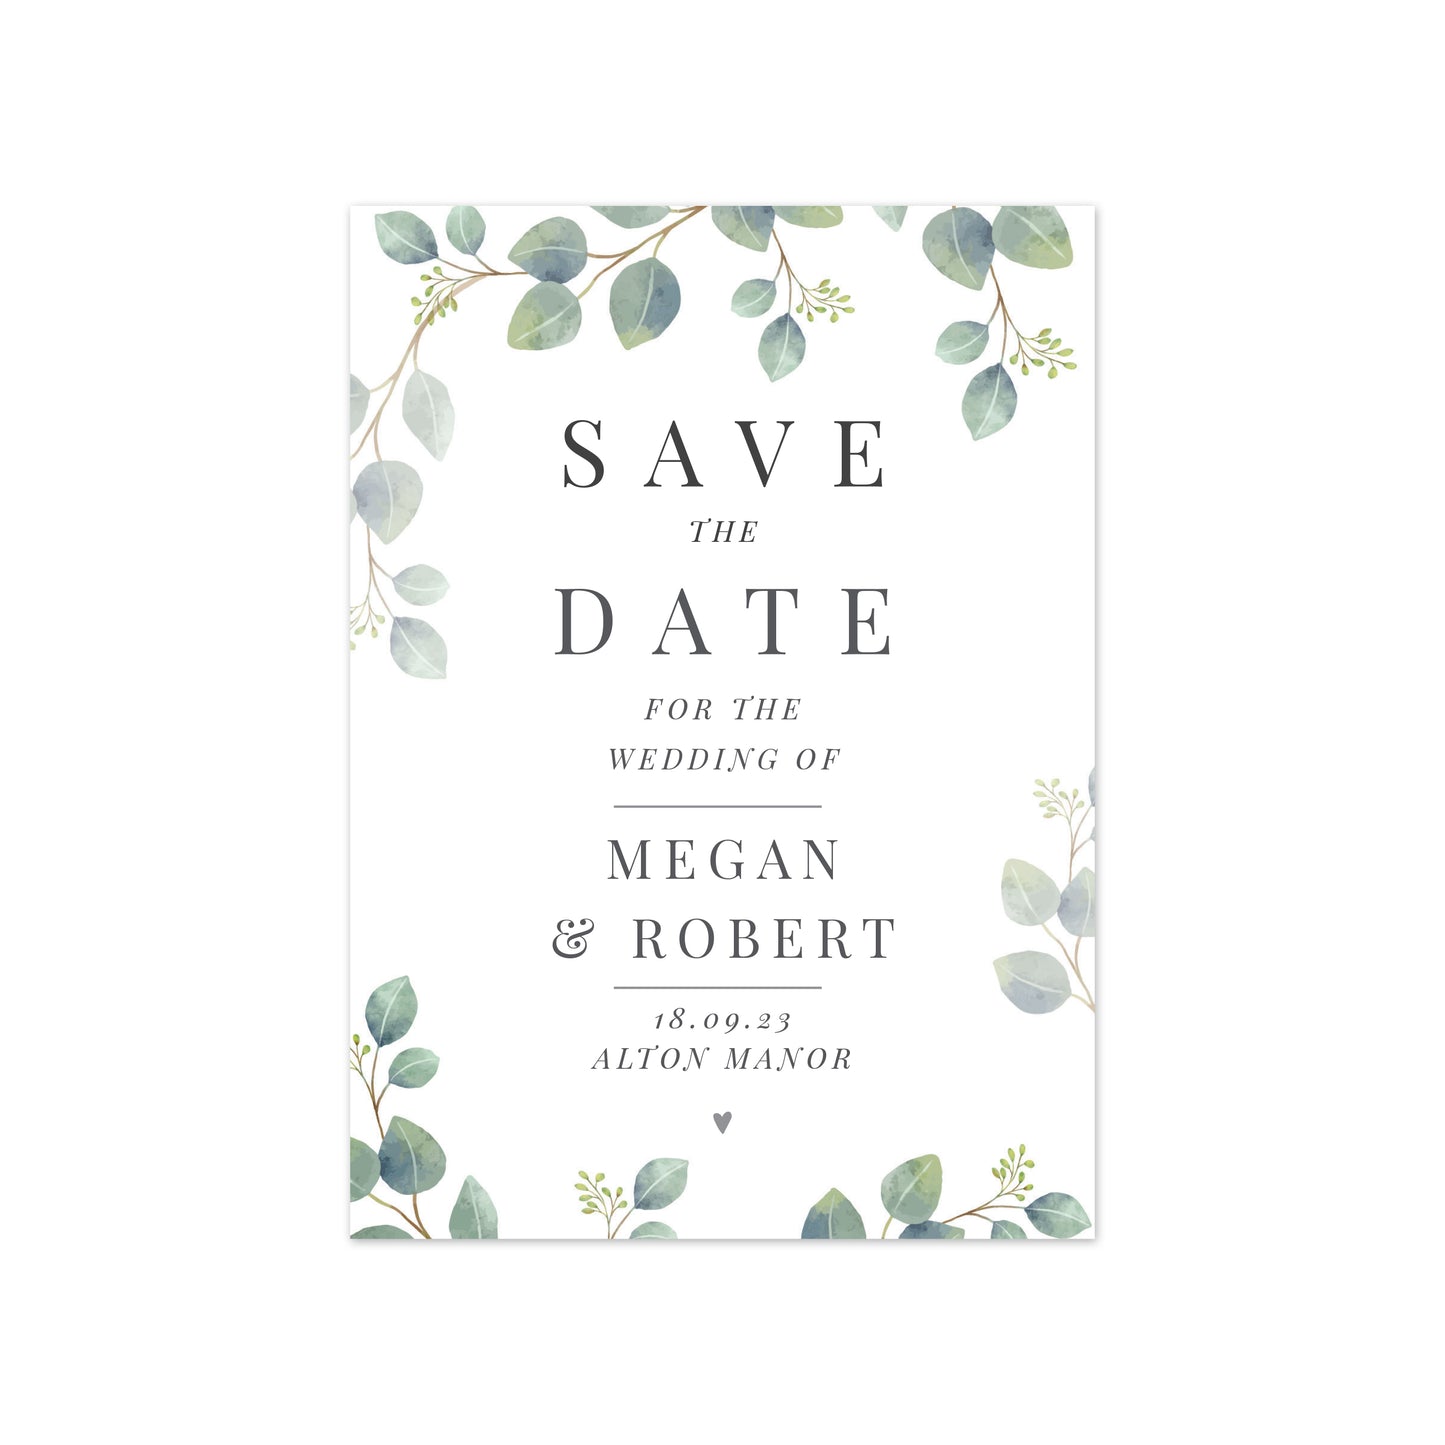 Personalised Save The Date Cards - Pack Of 36 - Violet Belle Gifts - Personalised Save The Date Cards - Pack Of 36